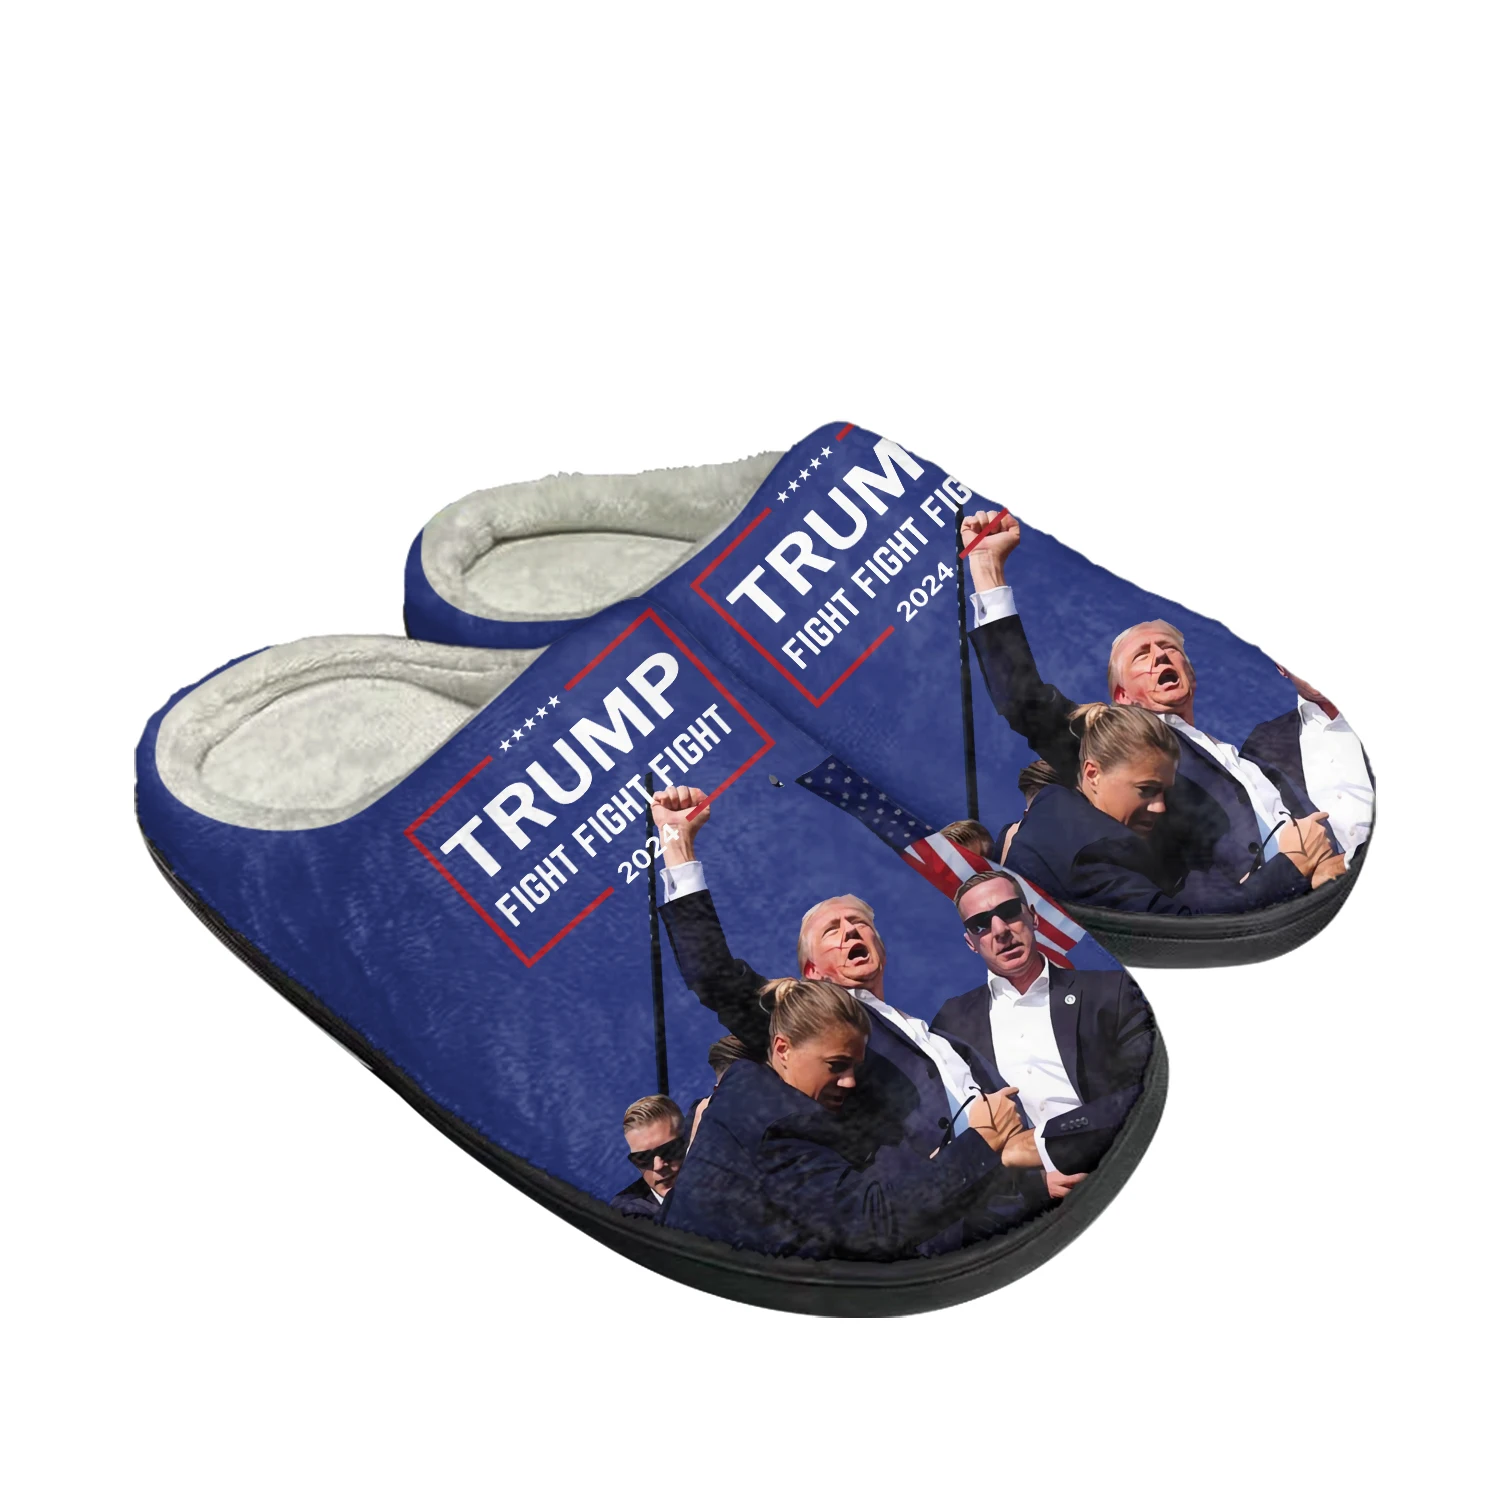 

Donald Trump Fight 2024 Make America GREAT AGAIN Home Cotton Slippers Mens Womens Plush Bedroom Keep Warm Indoor Customized Shoe